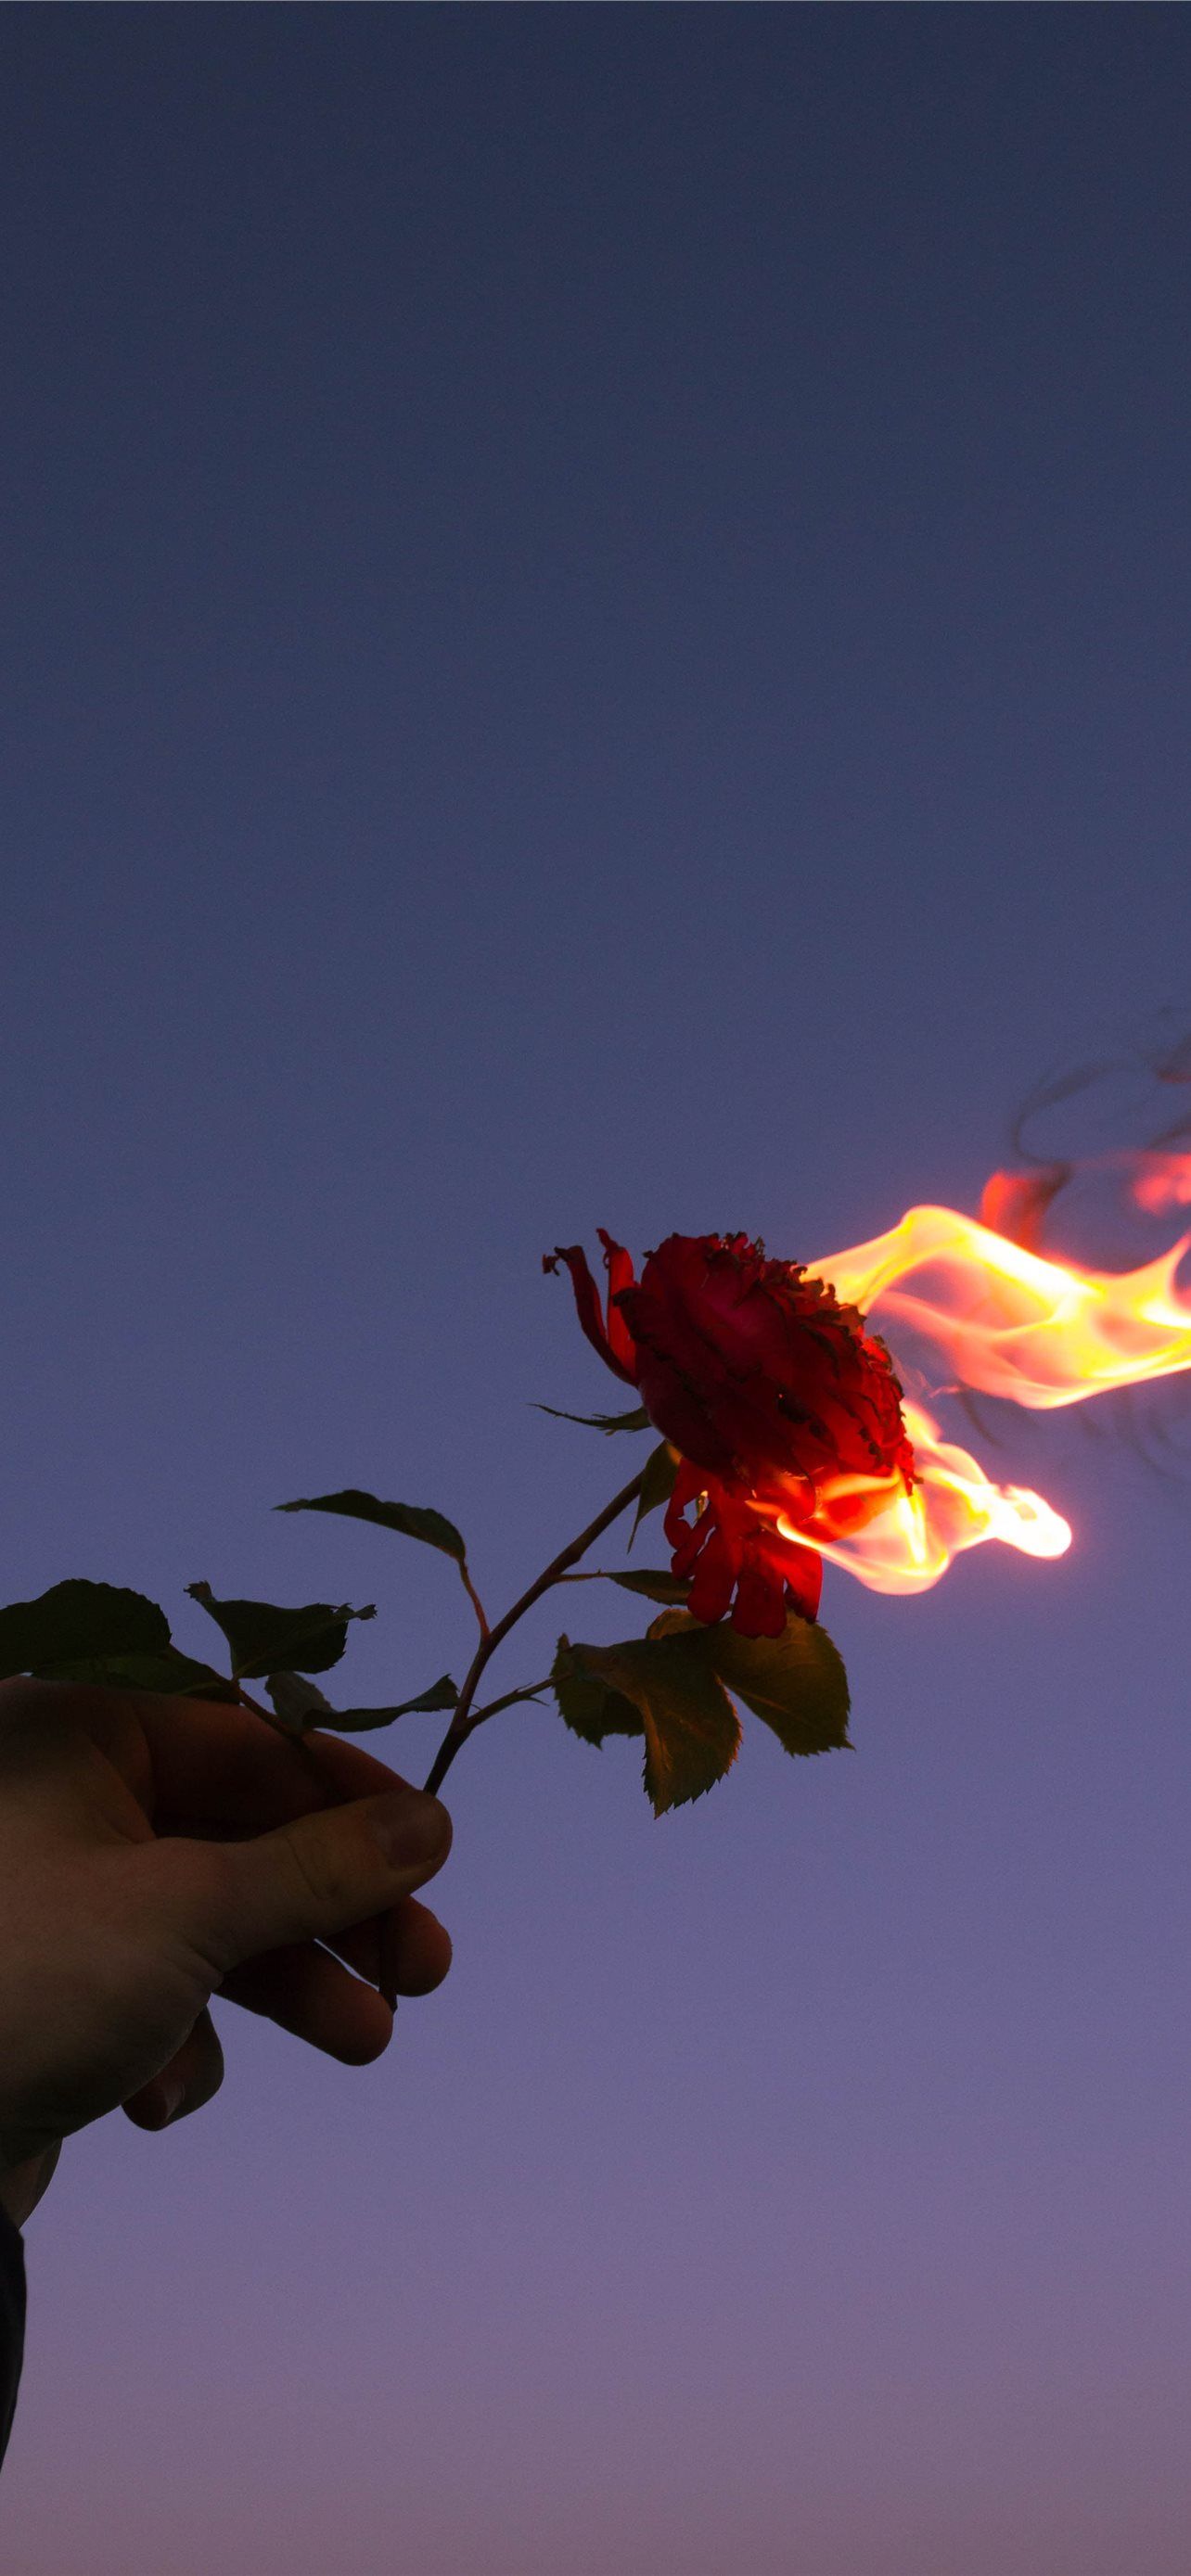 A hand holding a rose that is on fire - Flower